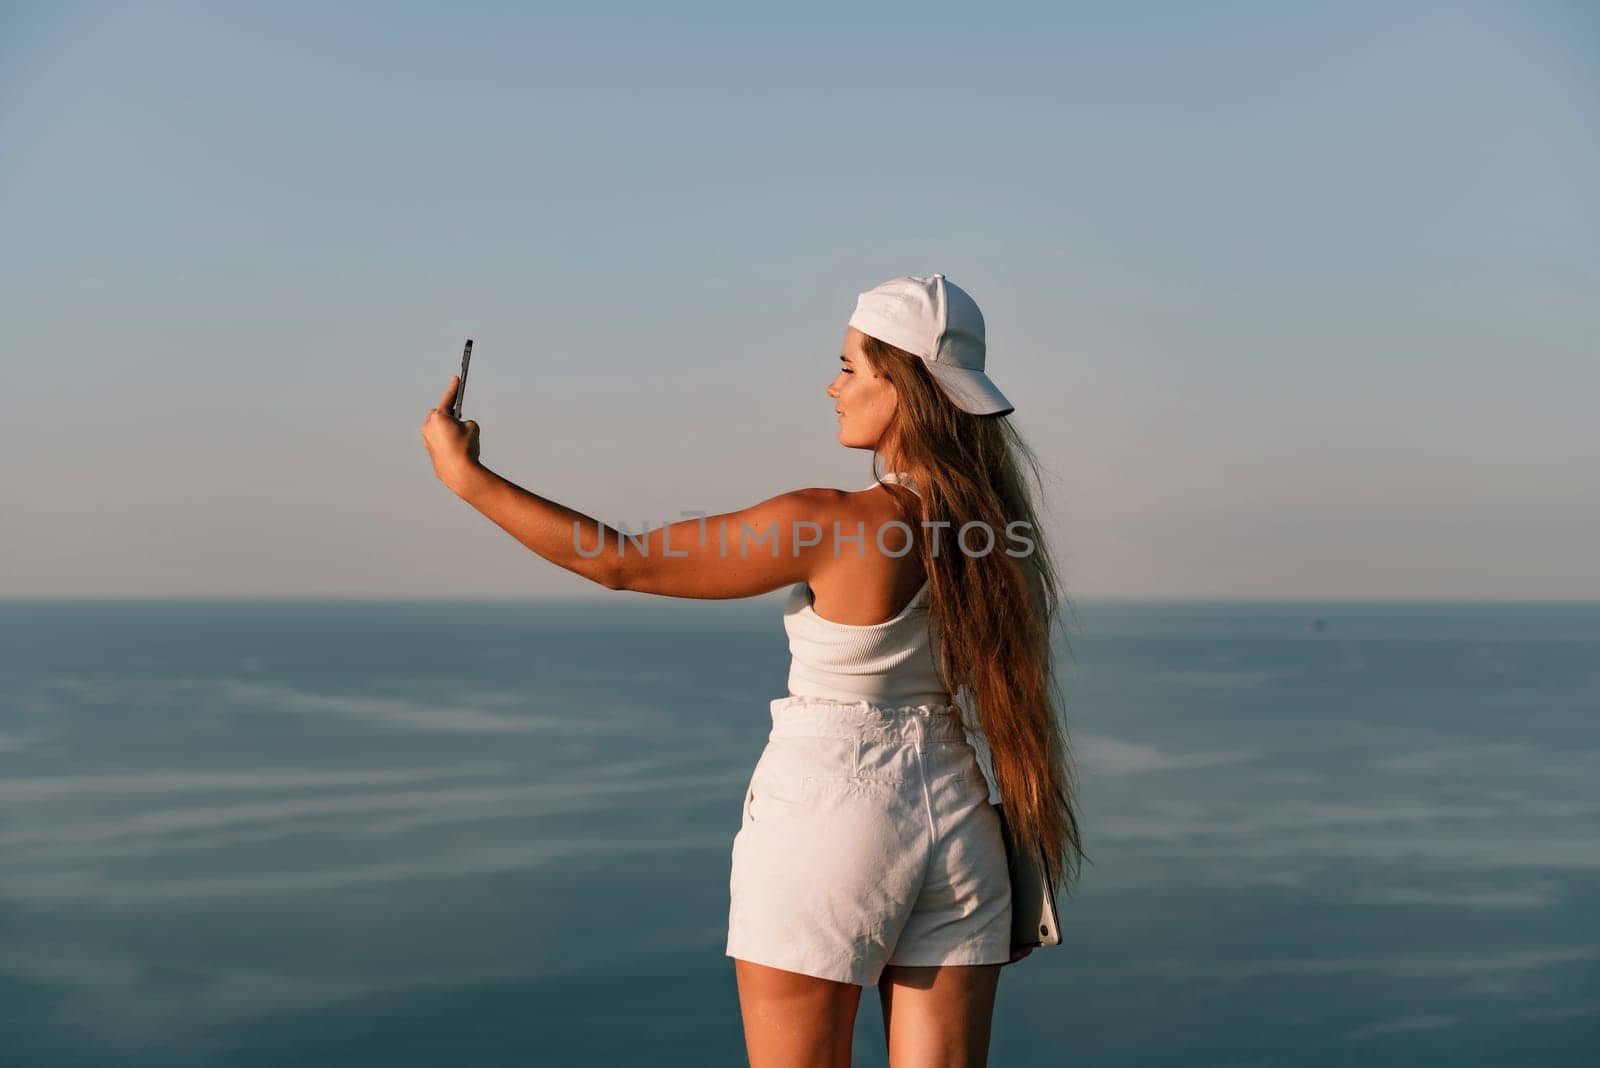 Selfie woman in a cap, white tank top and shorts makes a selfie shot mobile phone post photo social network outdoors on the background of the sea beach people vacation lifestyle travel concept